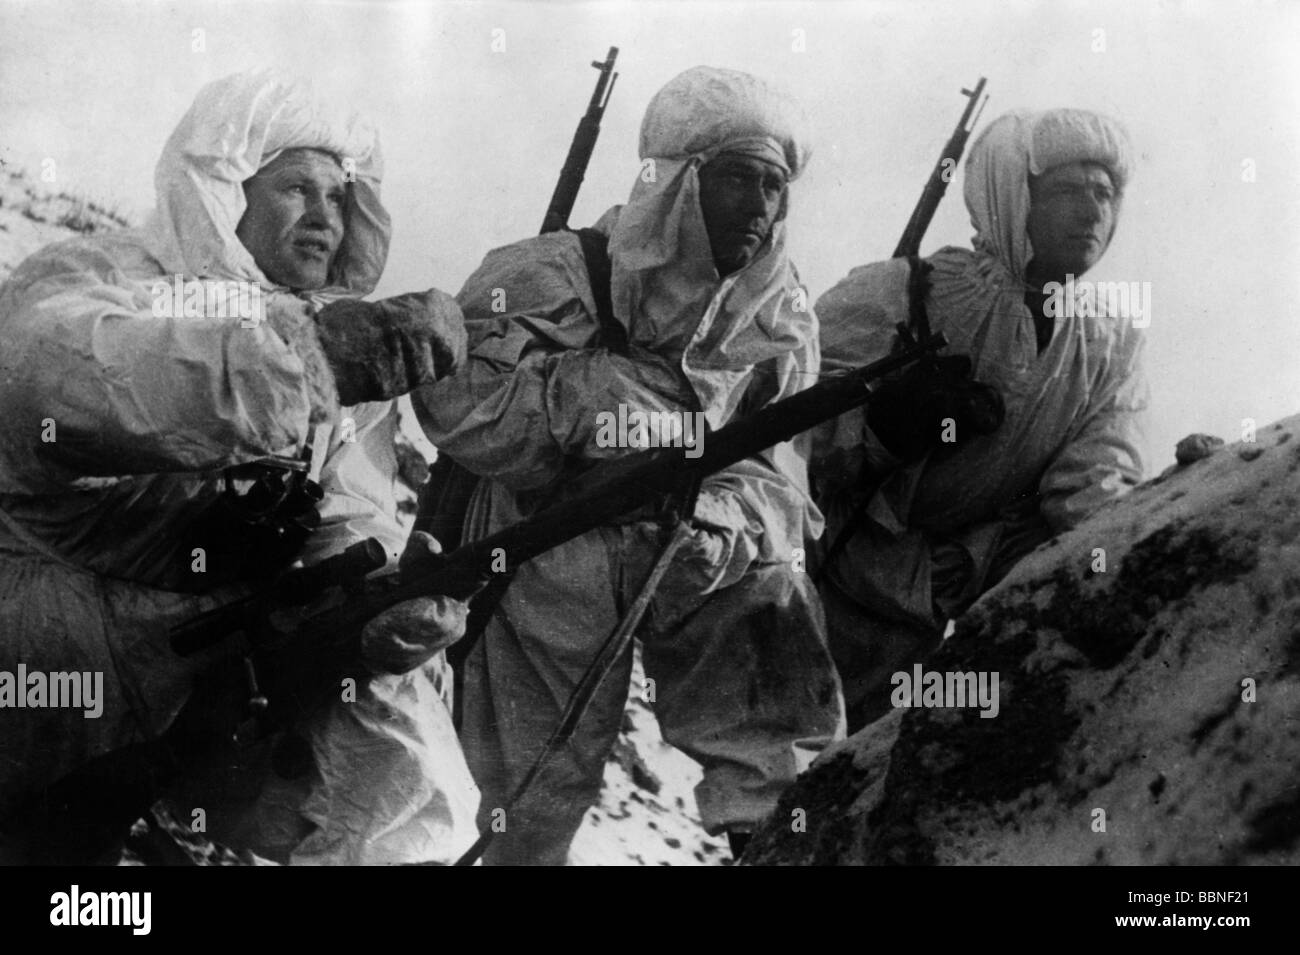 events, Second World War / WWII, Russia, Stalingrad 1942 / 1943, Soviet snipers in winter camouflage suits, among them Vasily Zaytsev (left), later 'Hero of the Soviet Union', Stock Photo